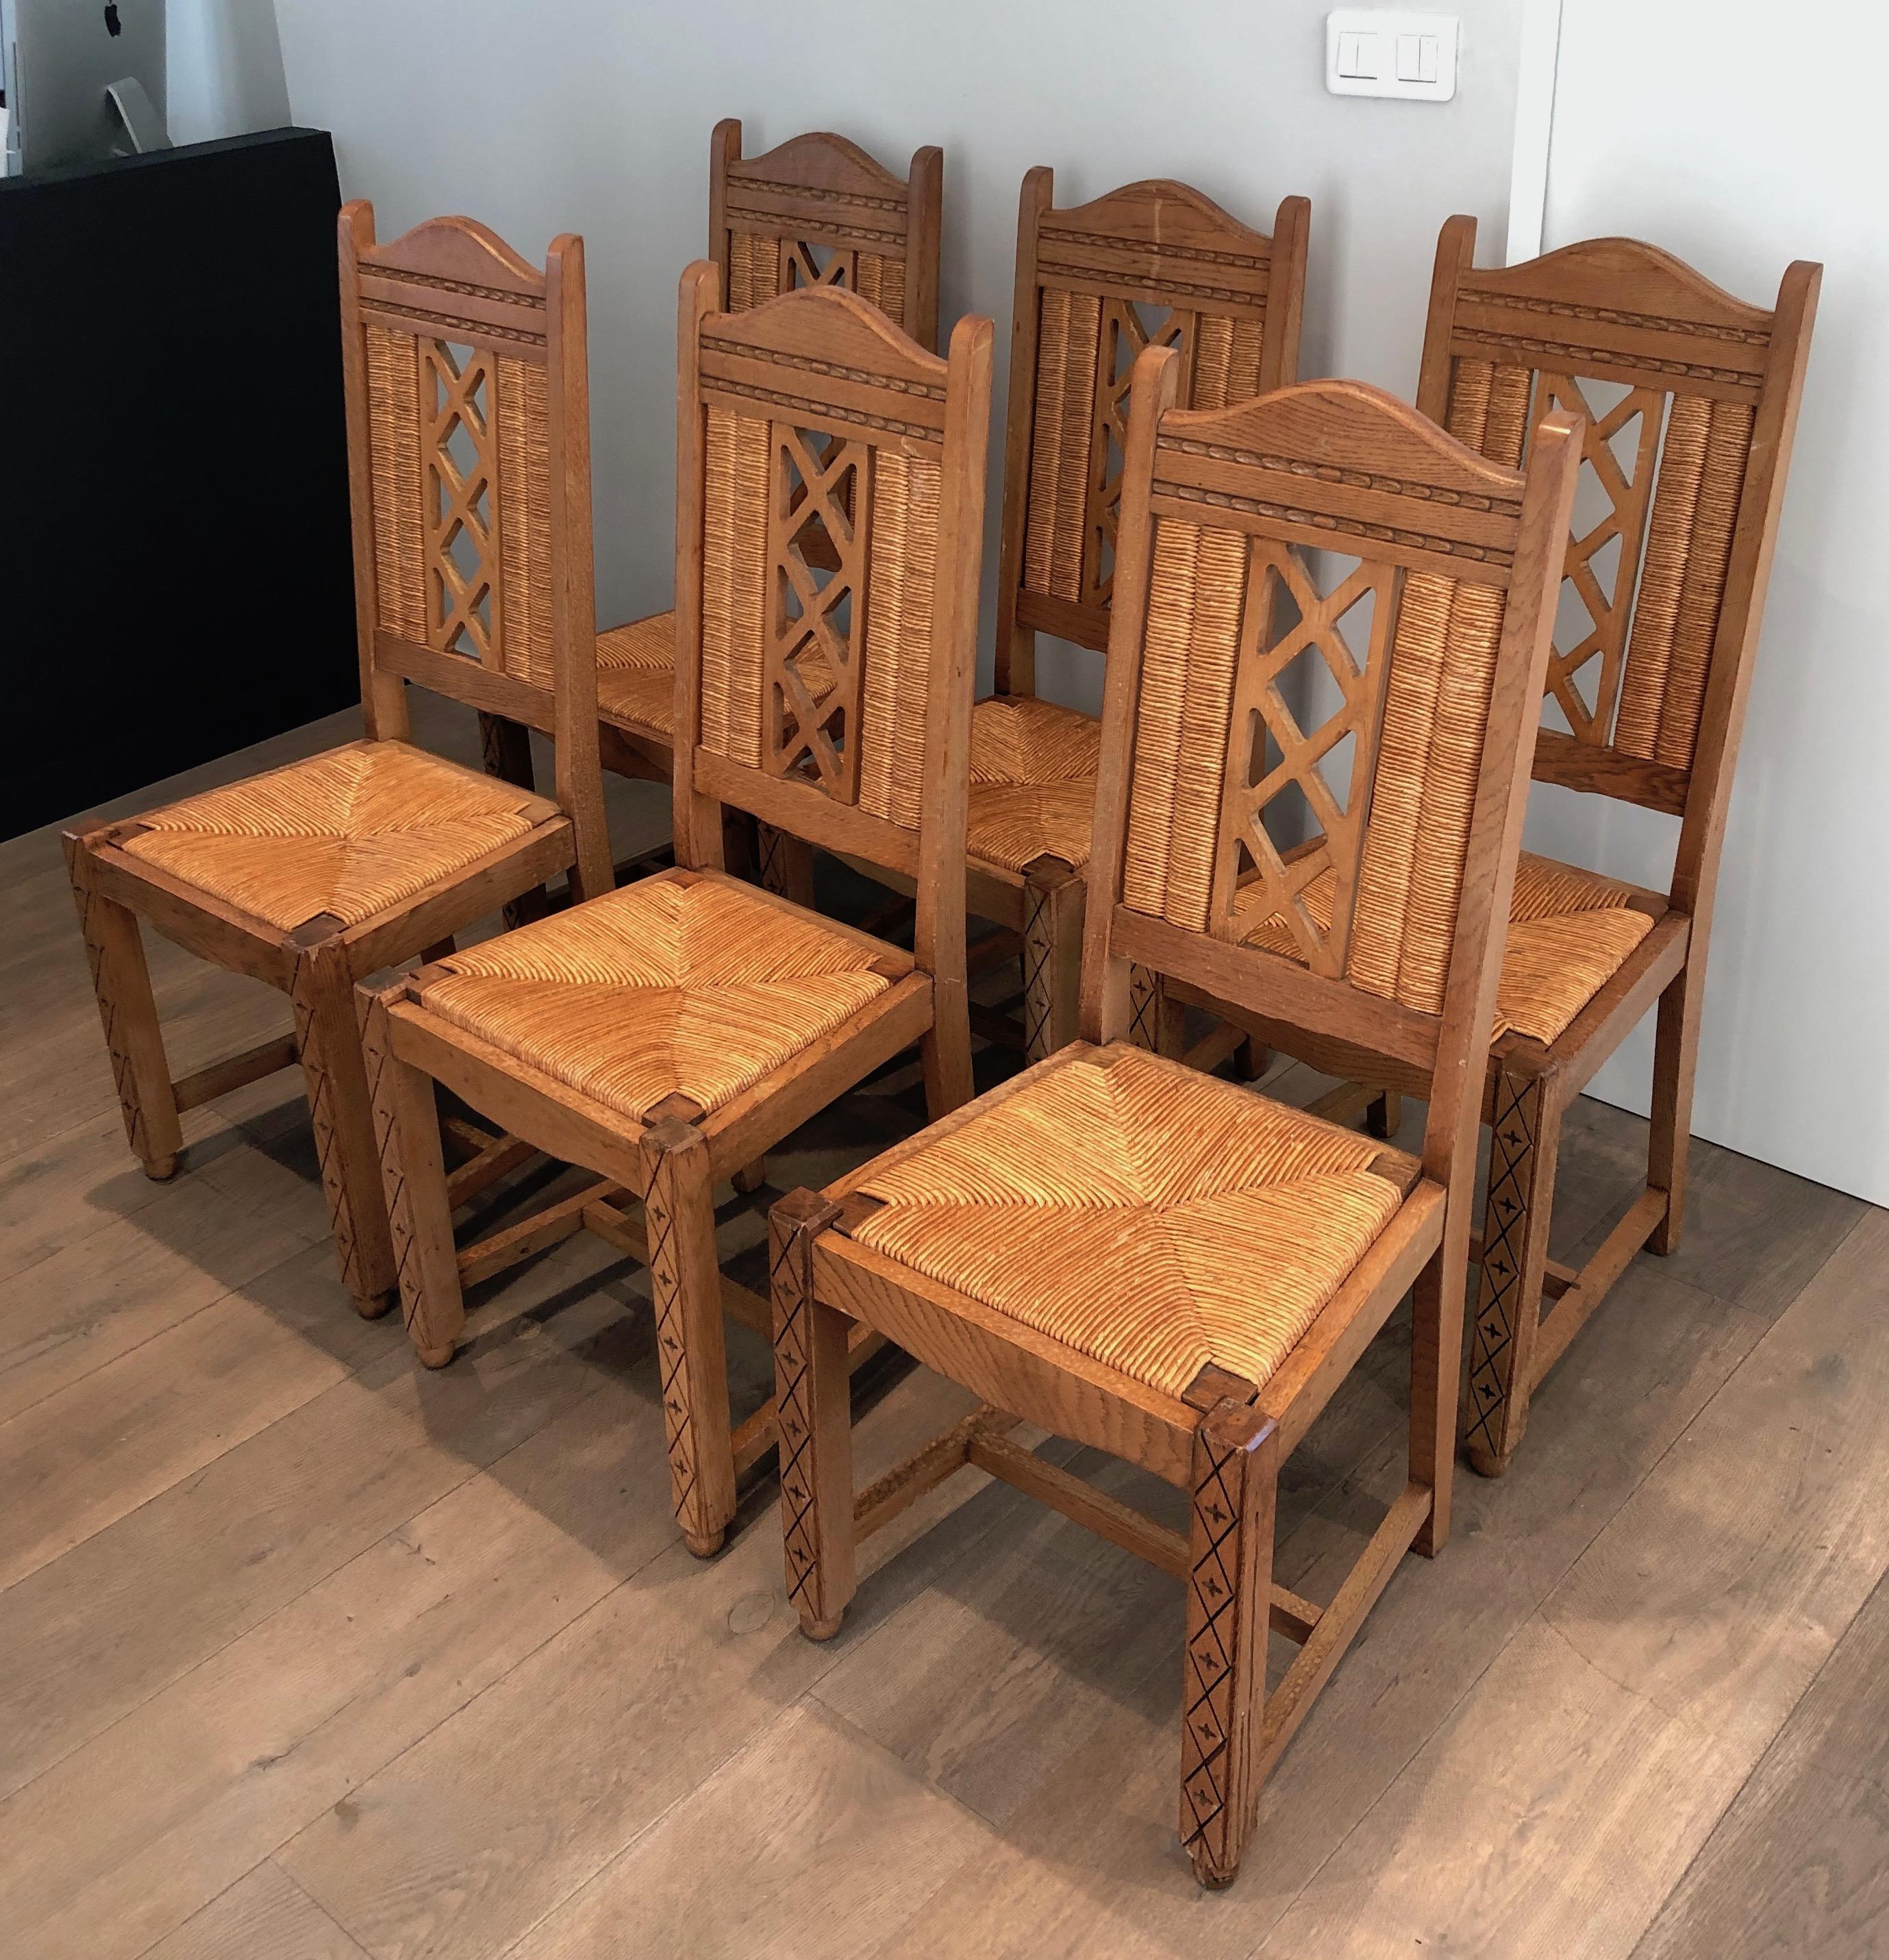 Set of 6 Brutalist Chairs Made of Ash and Straw, French Work, Circa 1950 For Sale 16